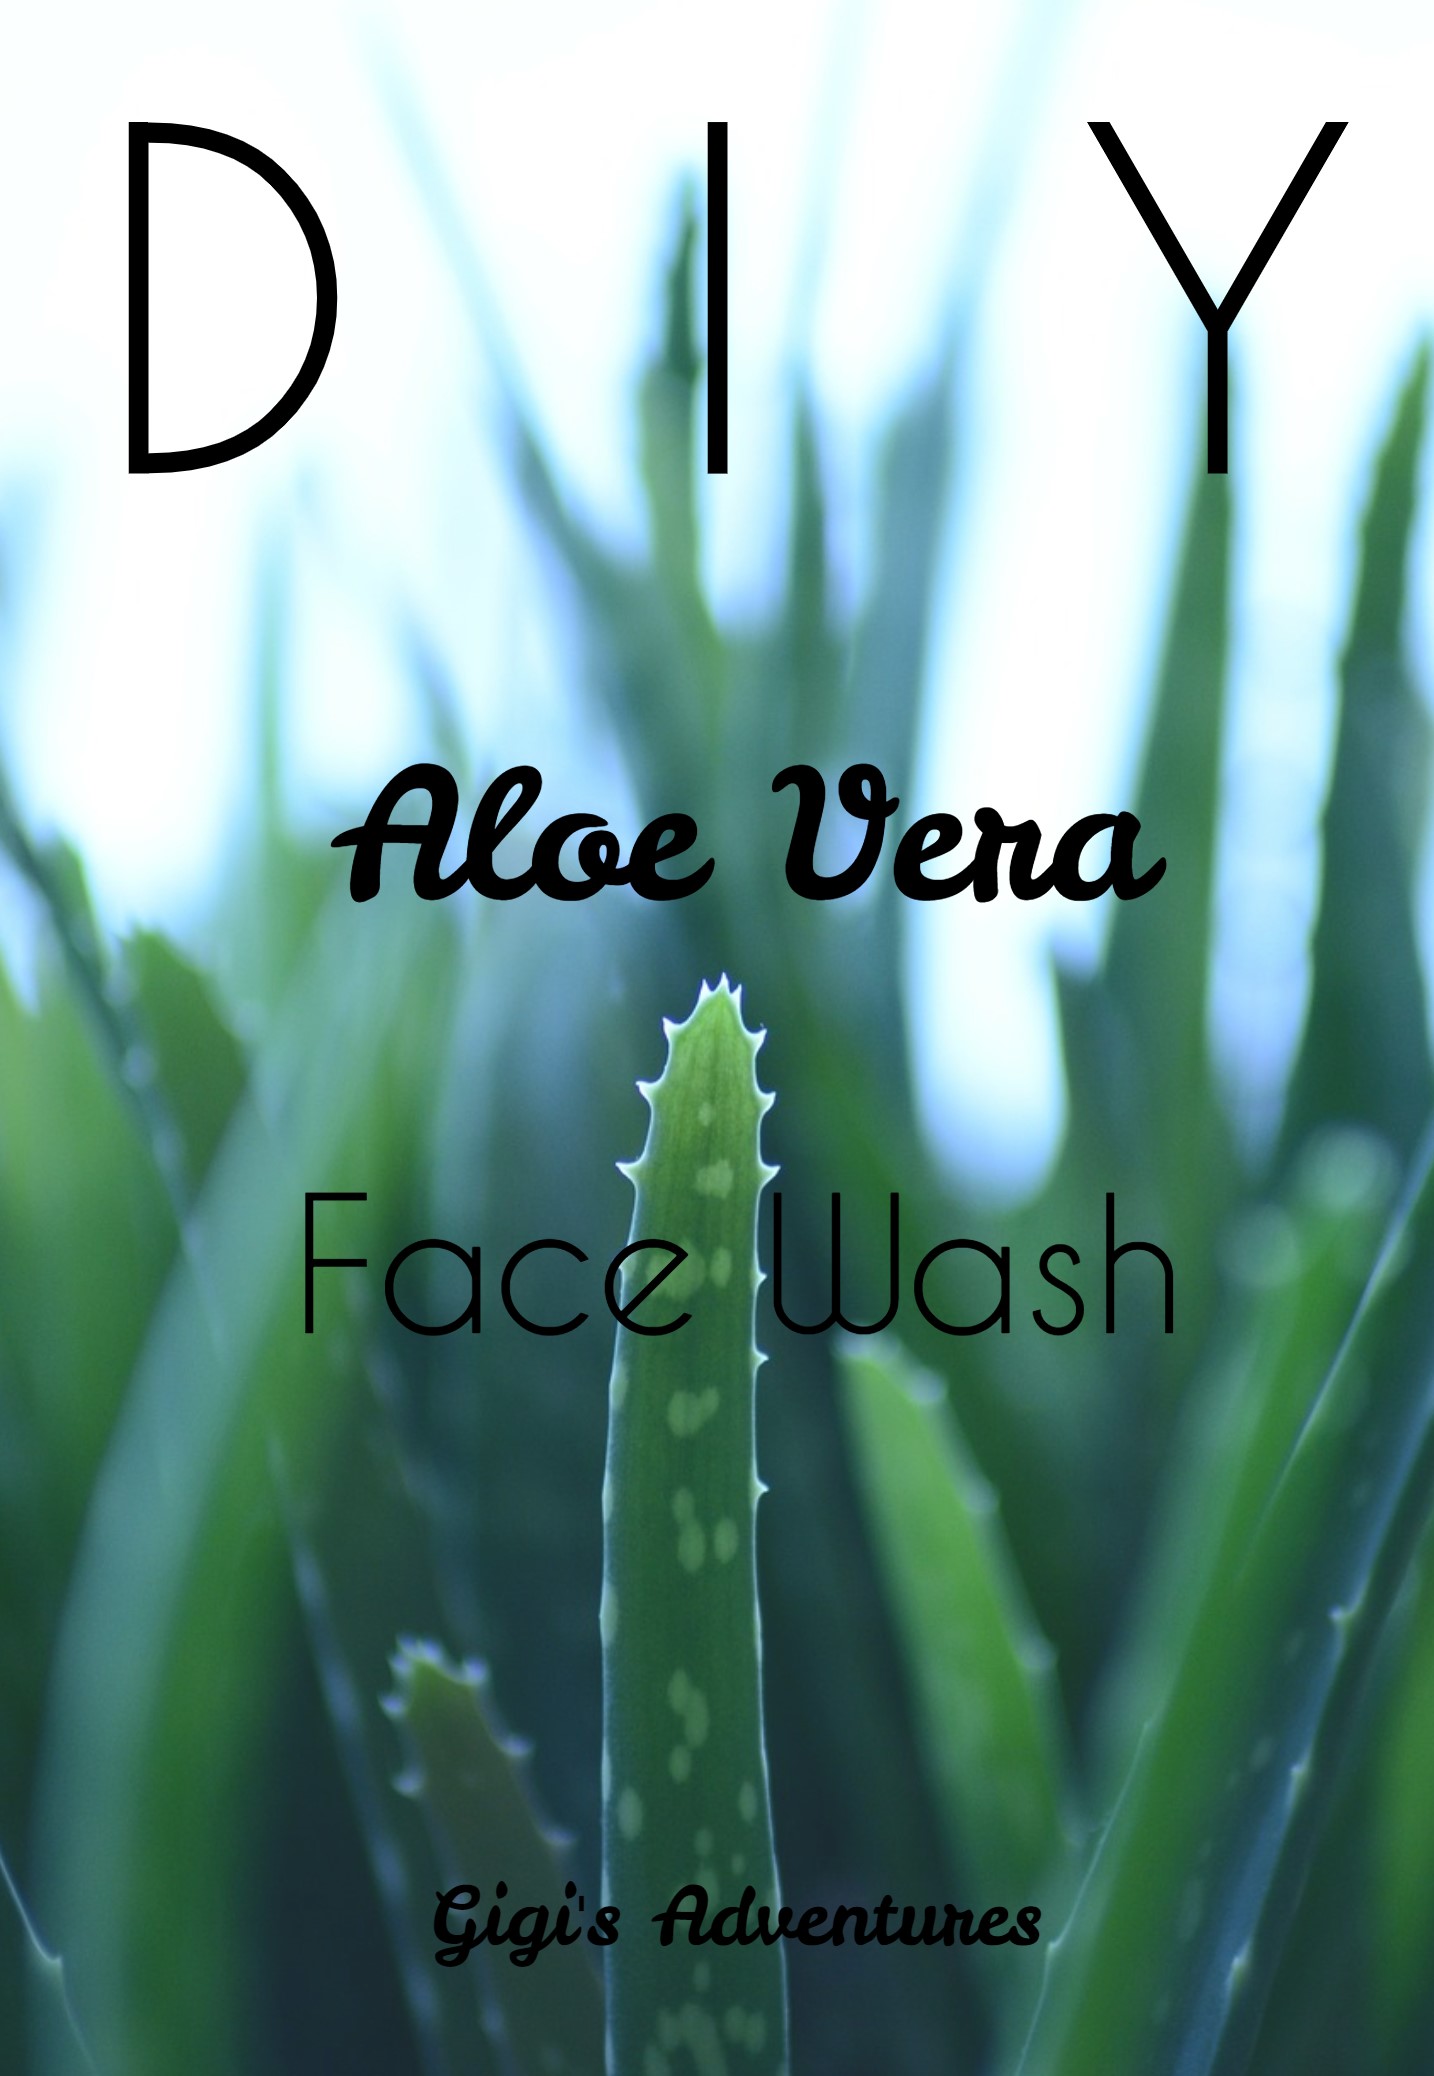 DIY 3-Ingredients Aloe Vera Face Wash - Purifies, Moisturizes and More!